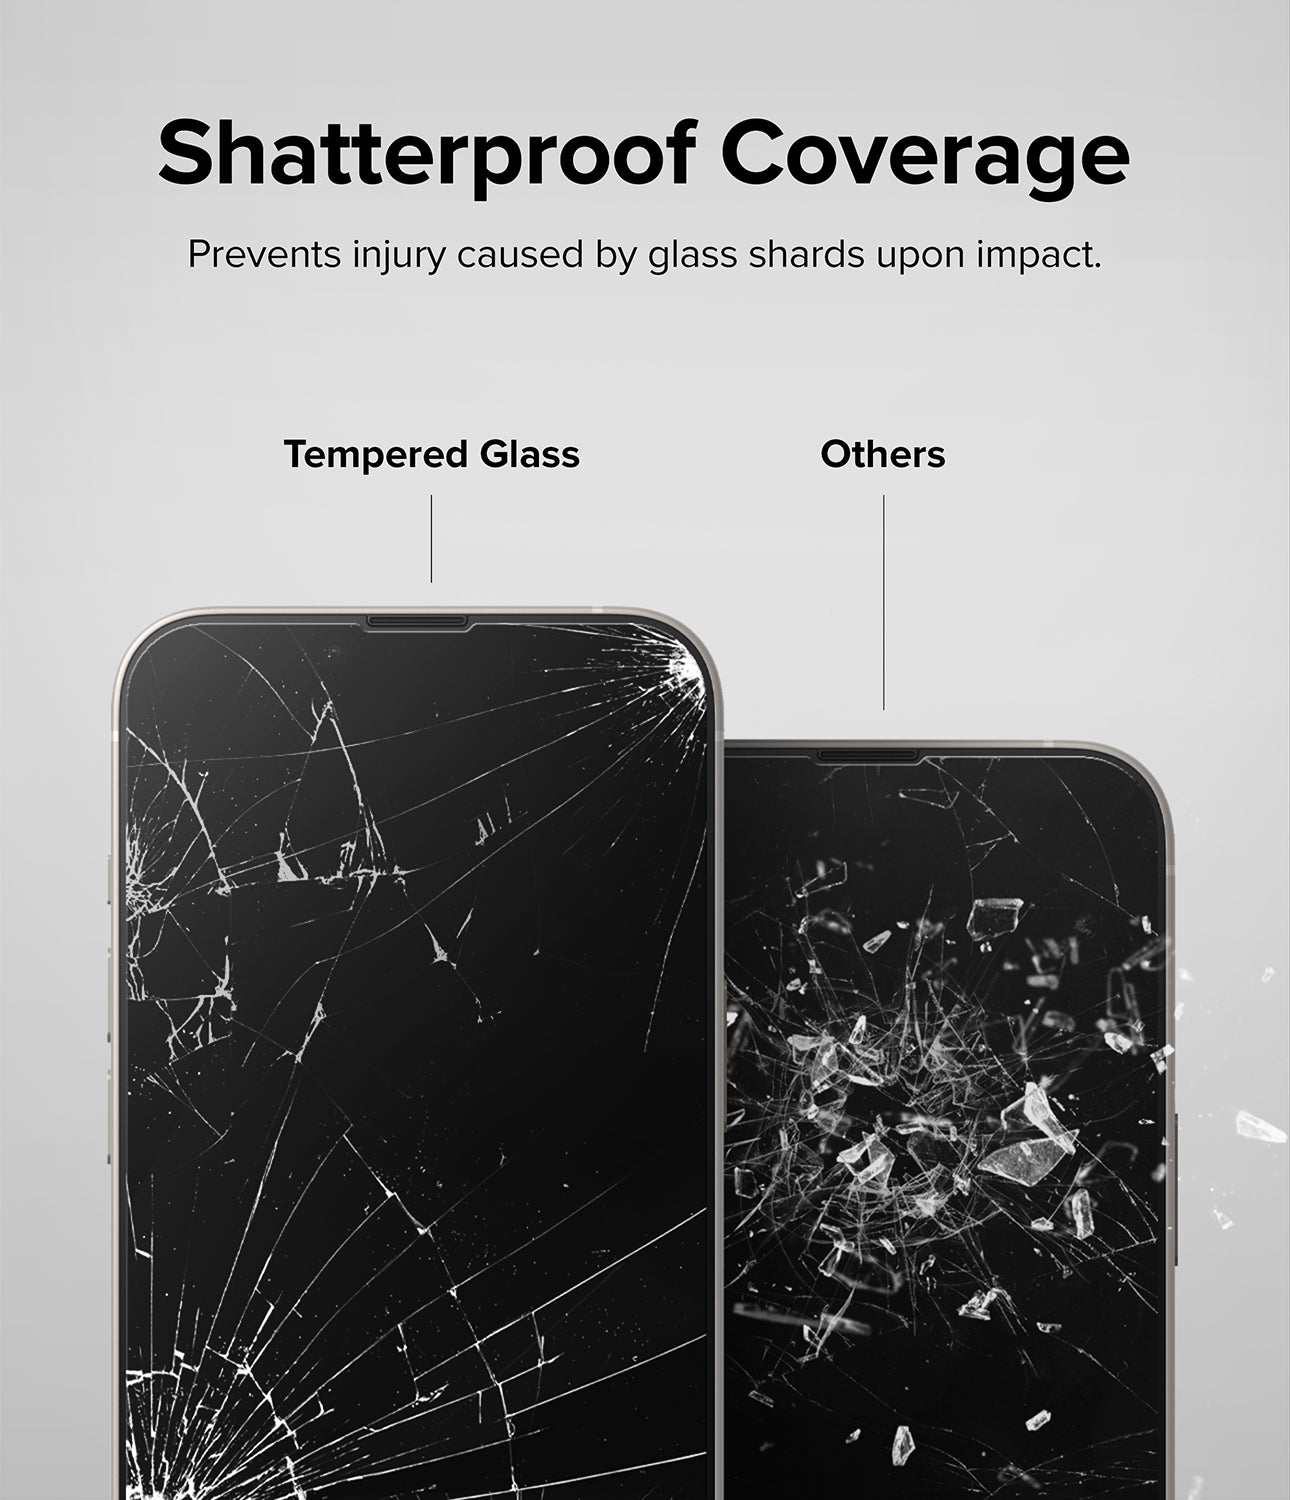 iPhone 14 / 13 Pro / 13 Screen Protector | Full Cover Glass - Shatterproof Coverage. Prevents injury caused by glass shards upon impact.